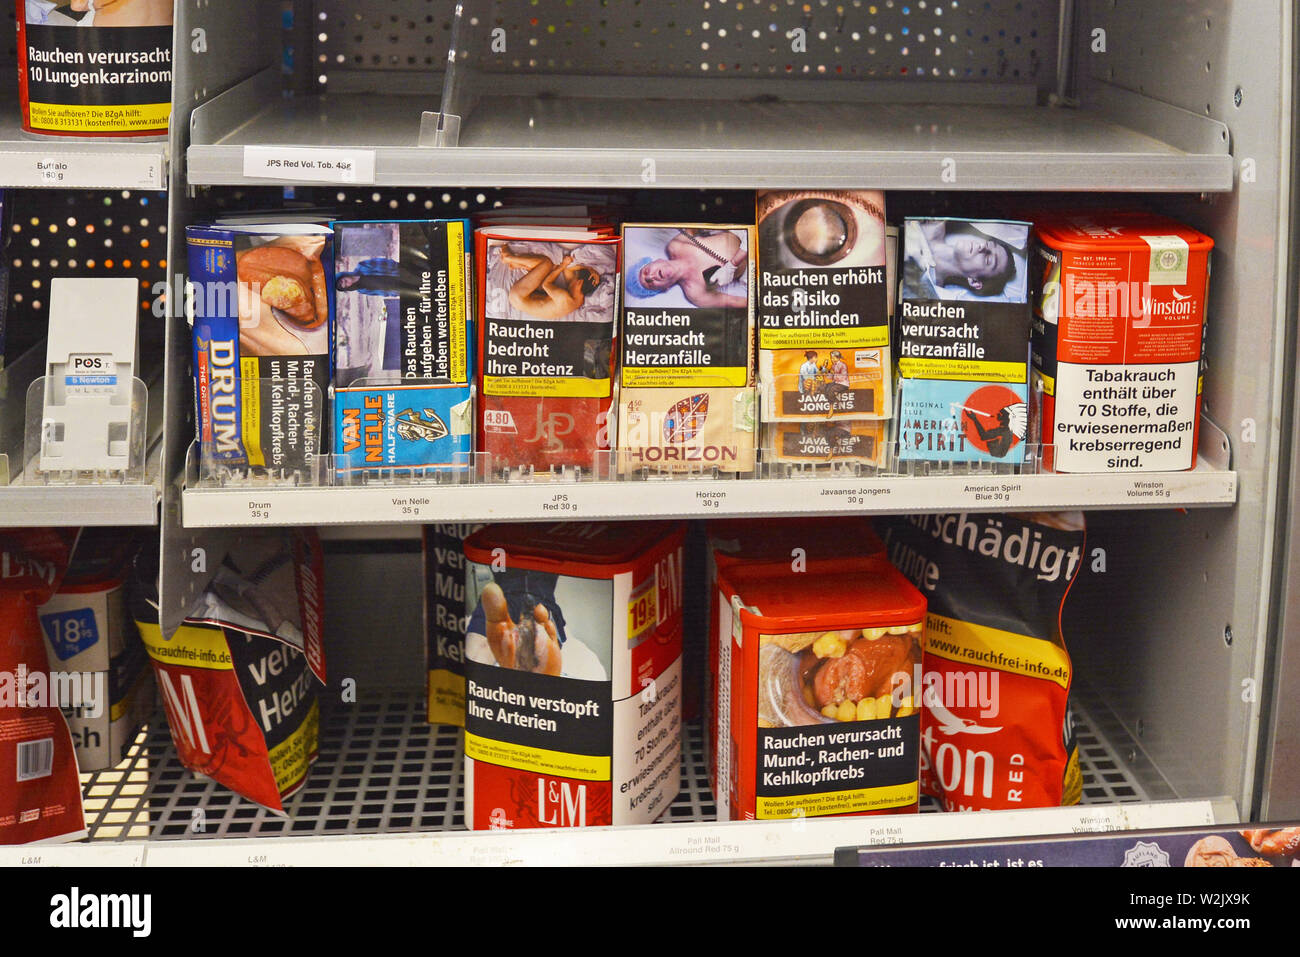 Shelf with tobacco packs for rolling cigarettes with warning labels on them in German supermarket Stock Photo